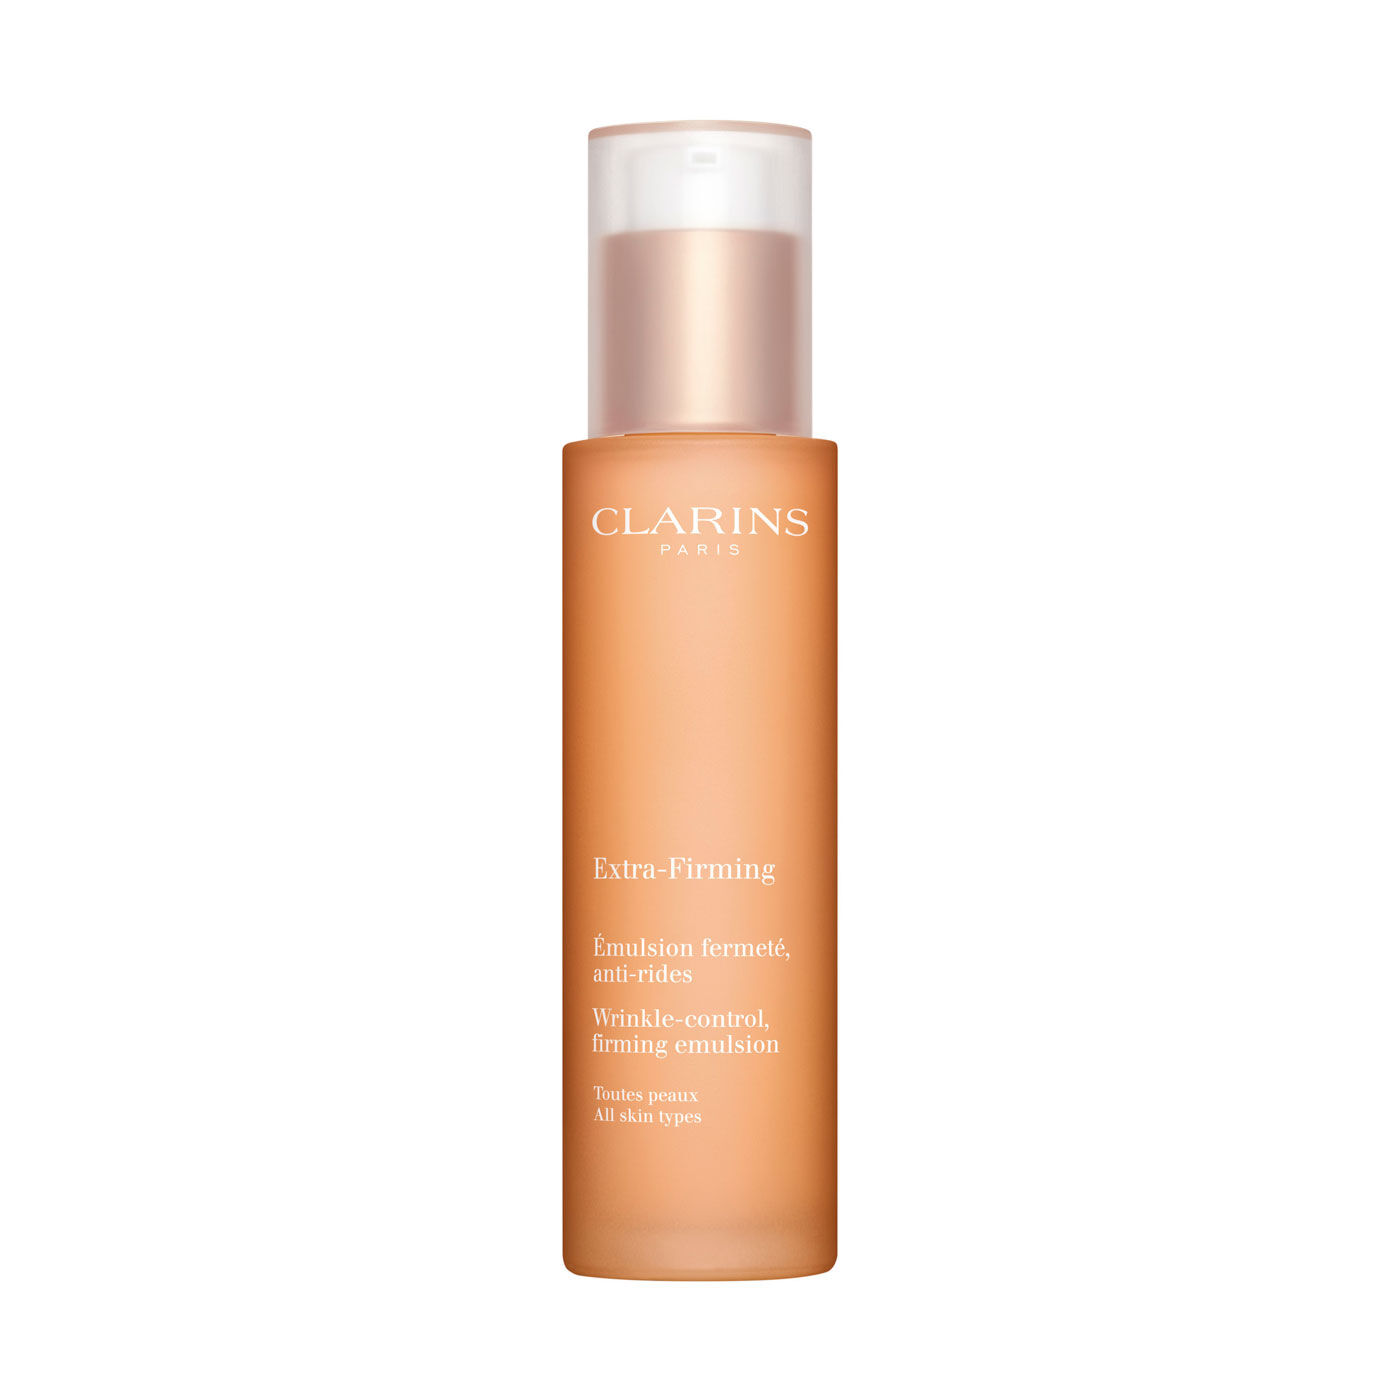 Shop Clarins Extra-firming Wrinkle-control Firming Emulsion